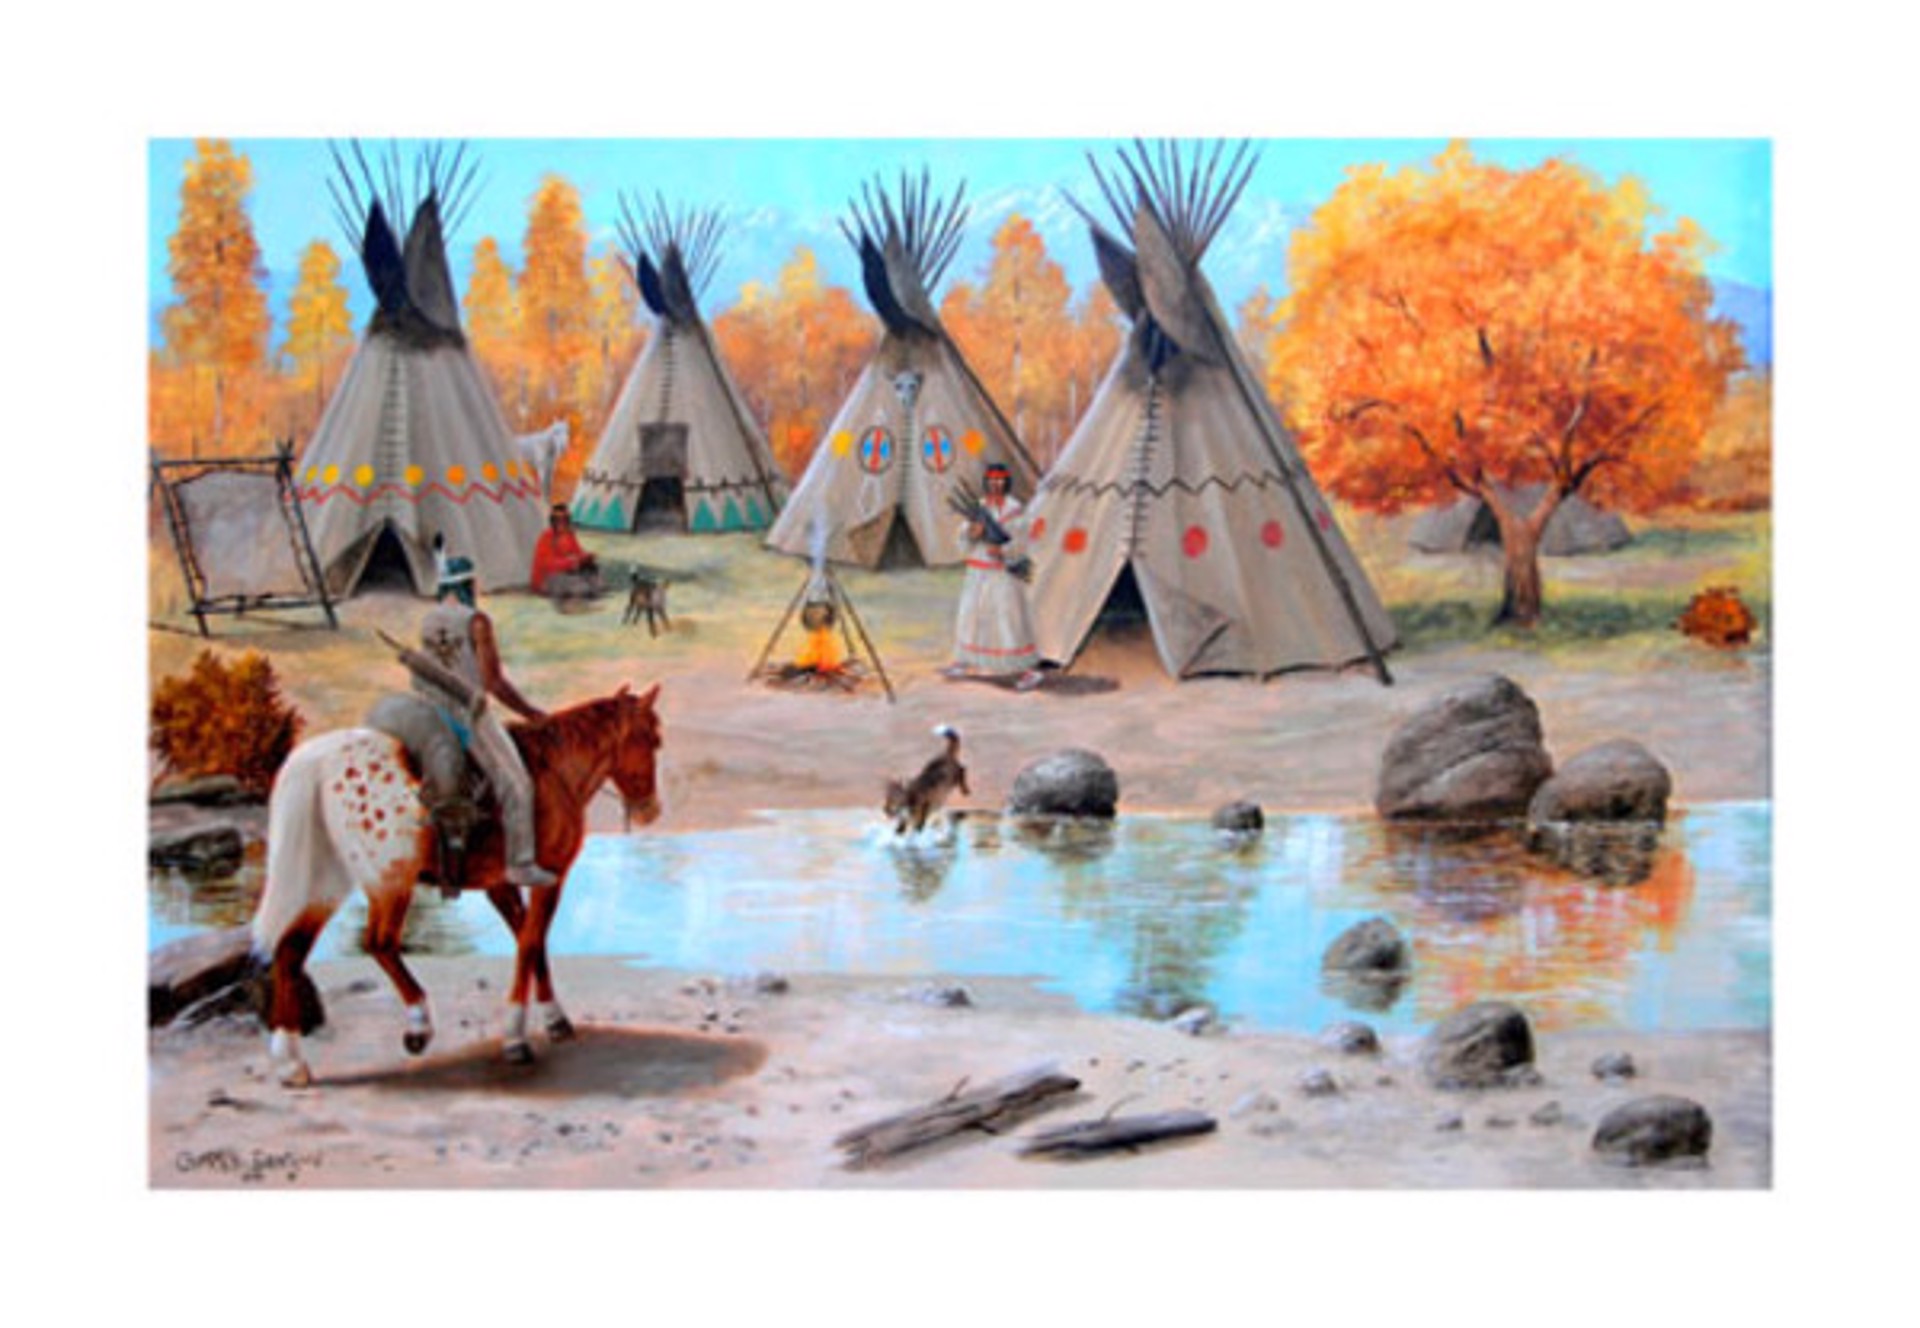 Teepee/Indian Village by Charles Damrow